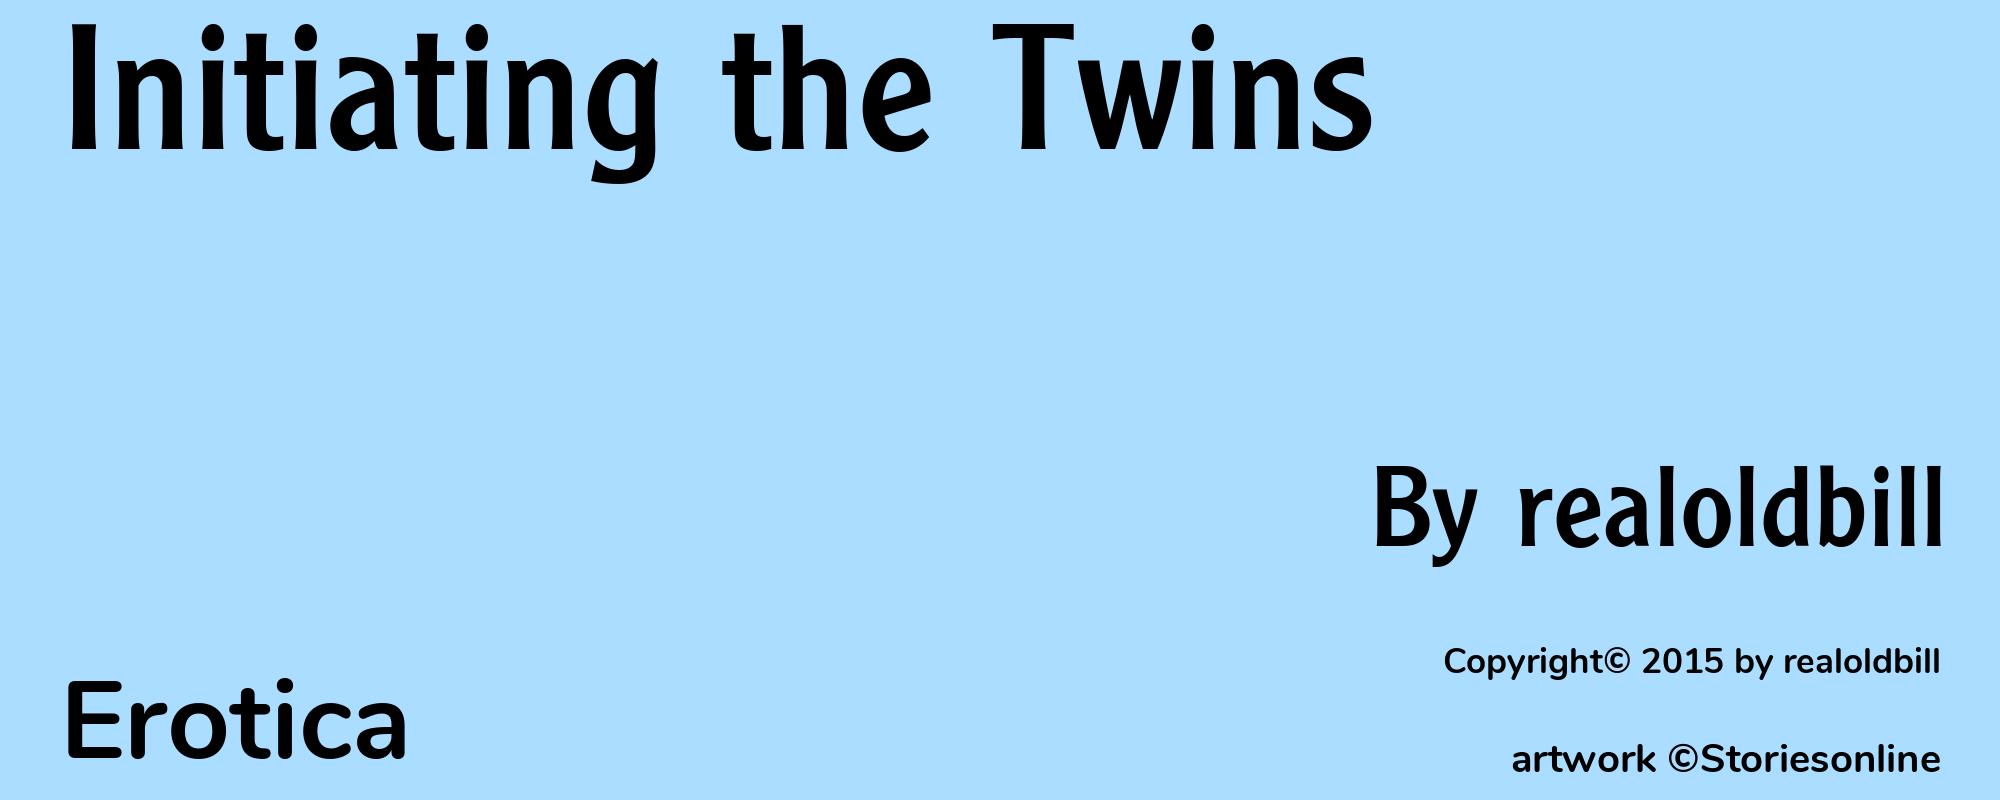 Initiating the Twins - Cover